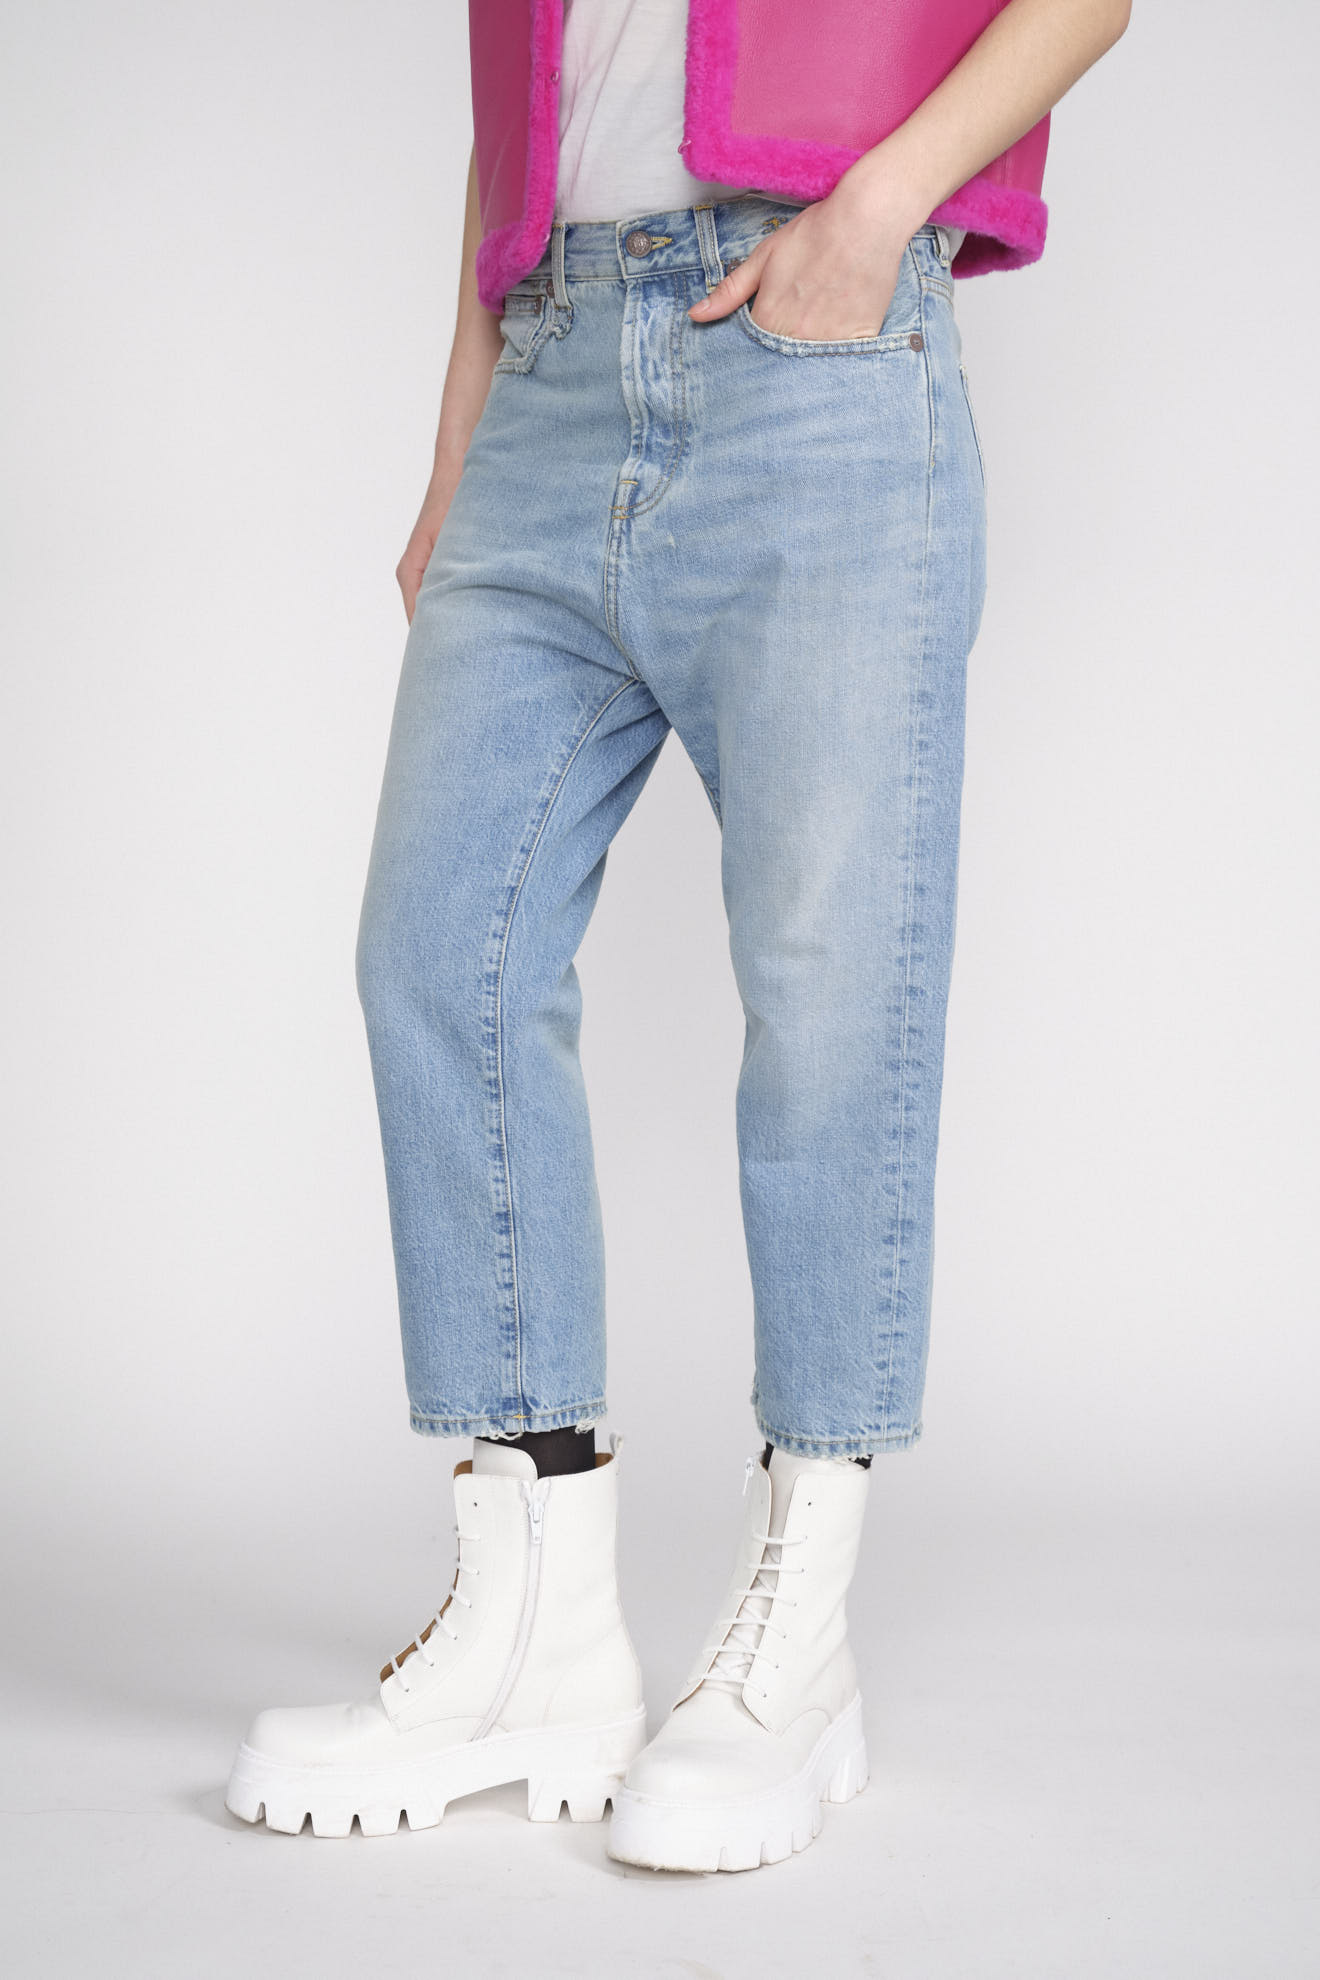 R13 Tailored Drop - Low crotch jeans blue 25